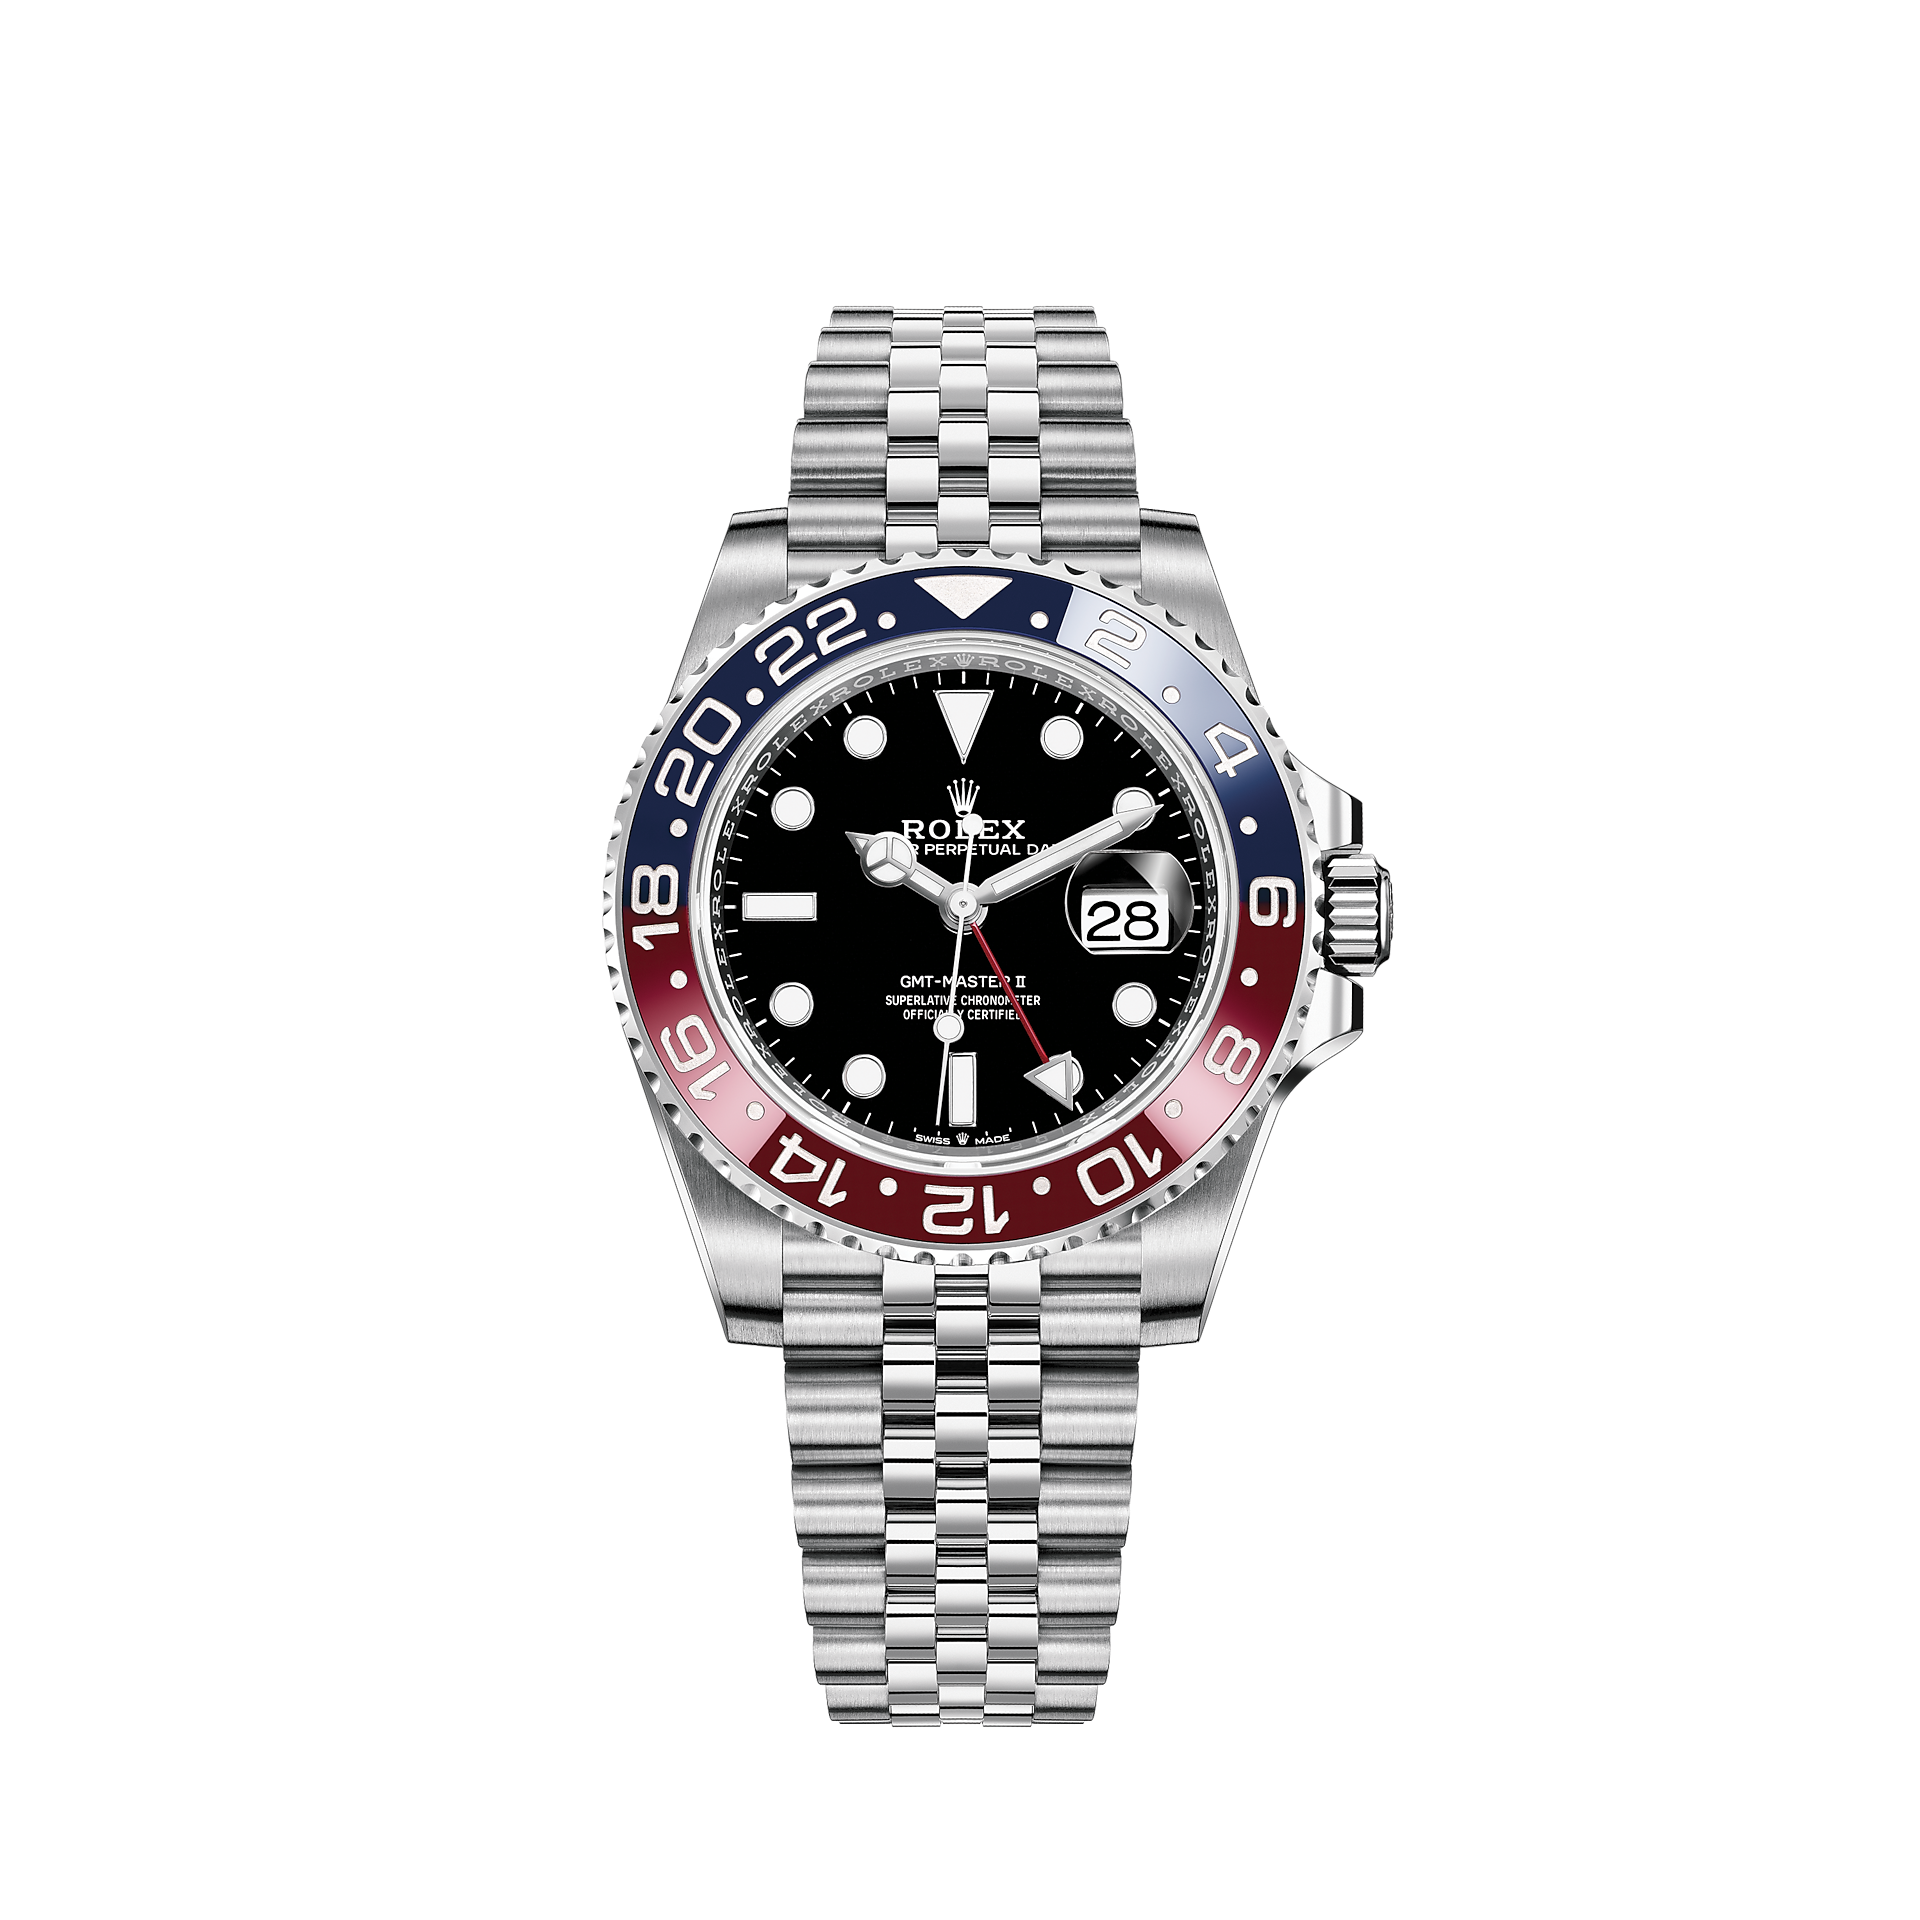 Gmt time